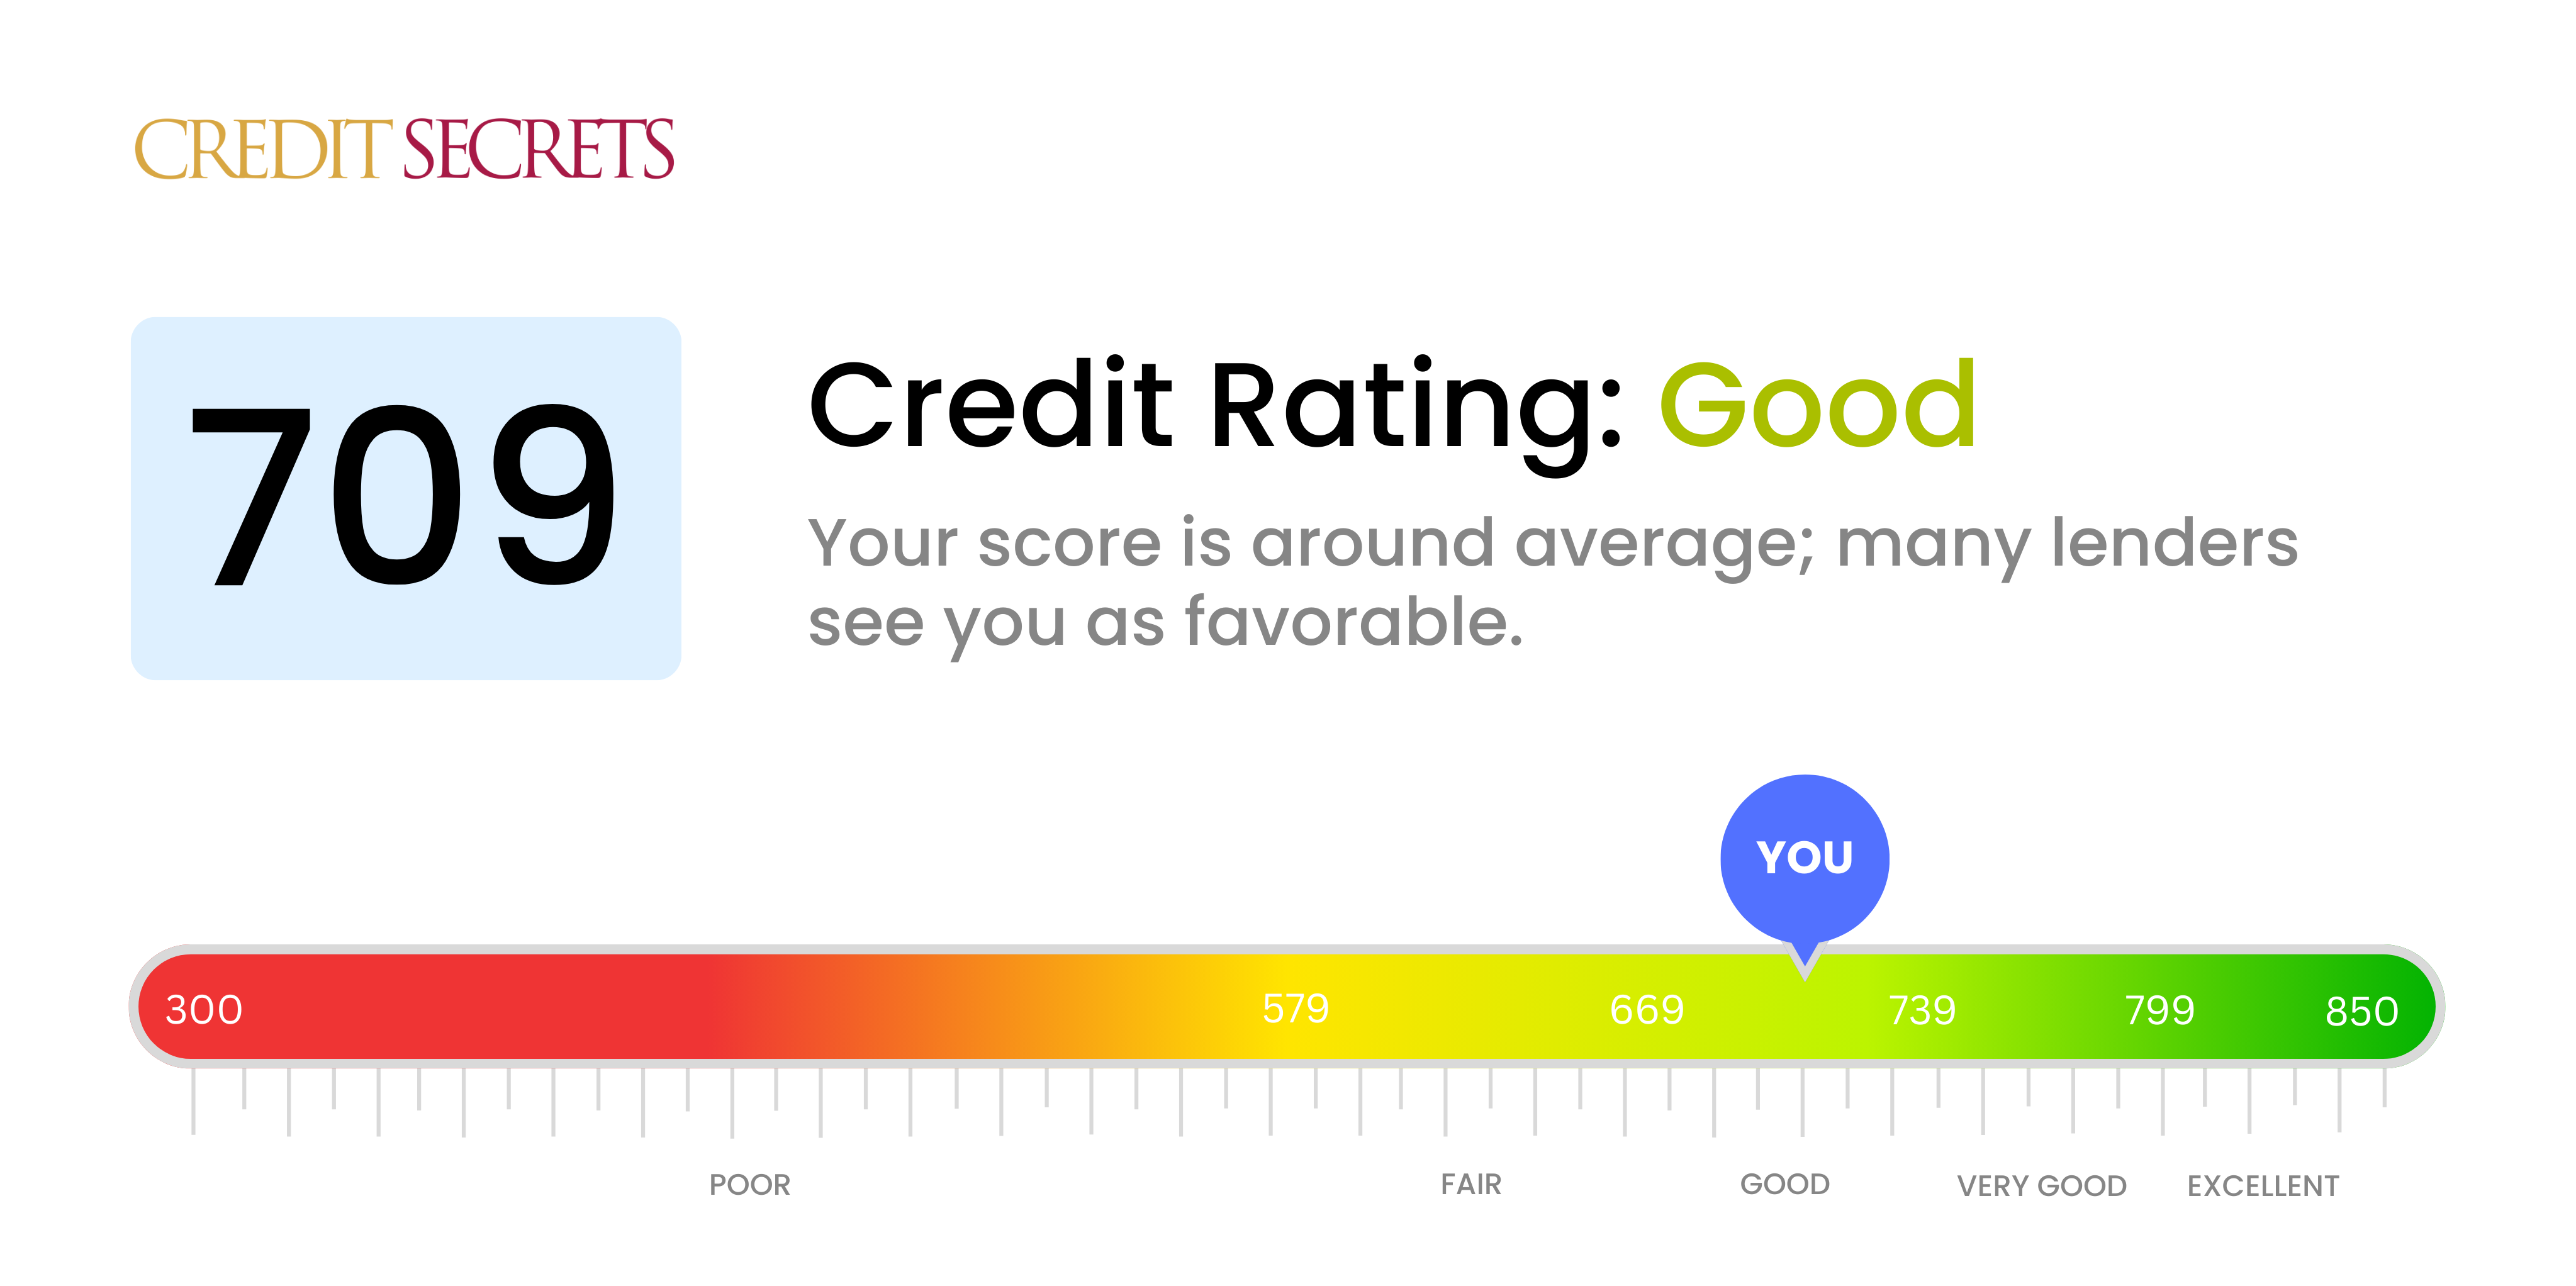 Is 709 a good credit score?